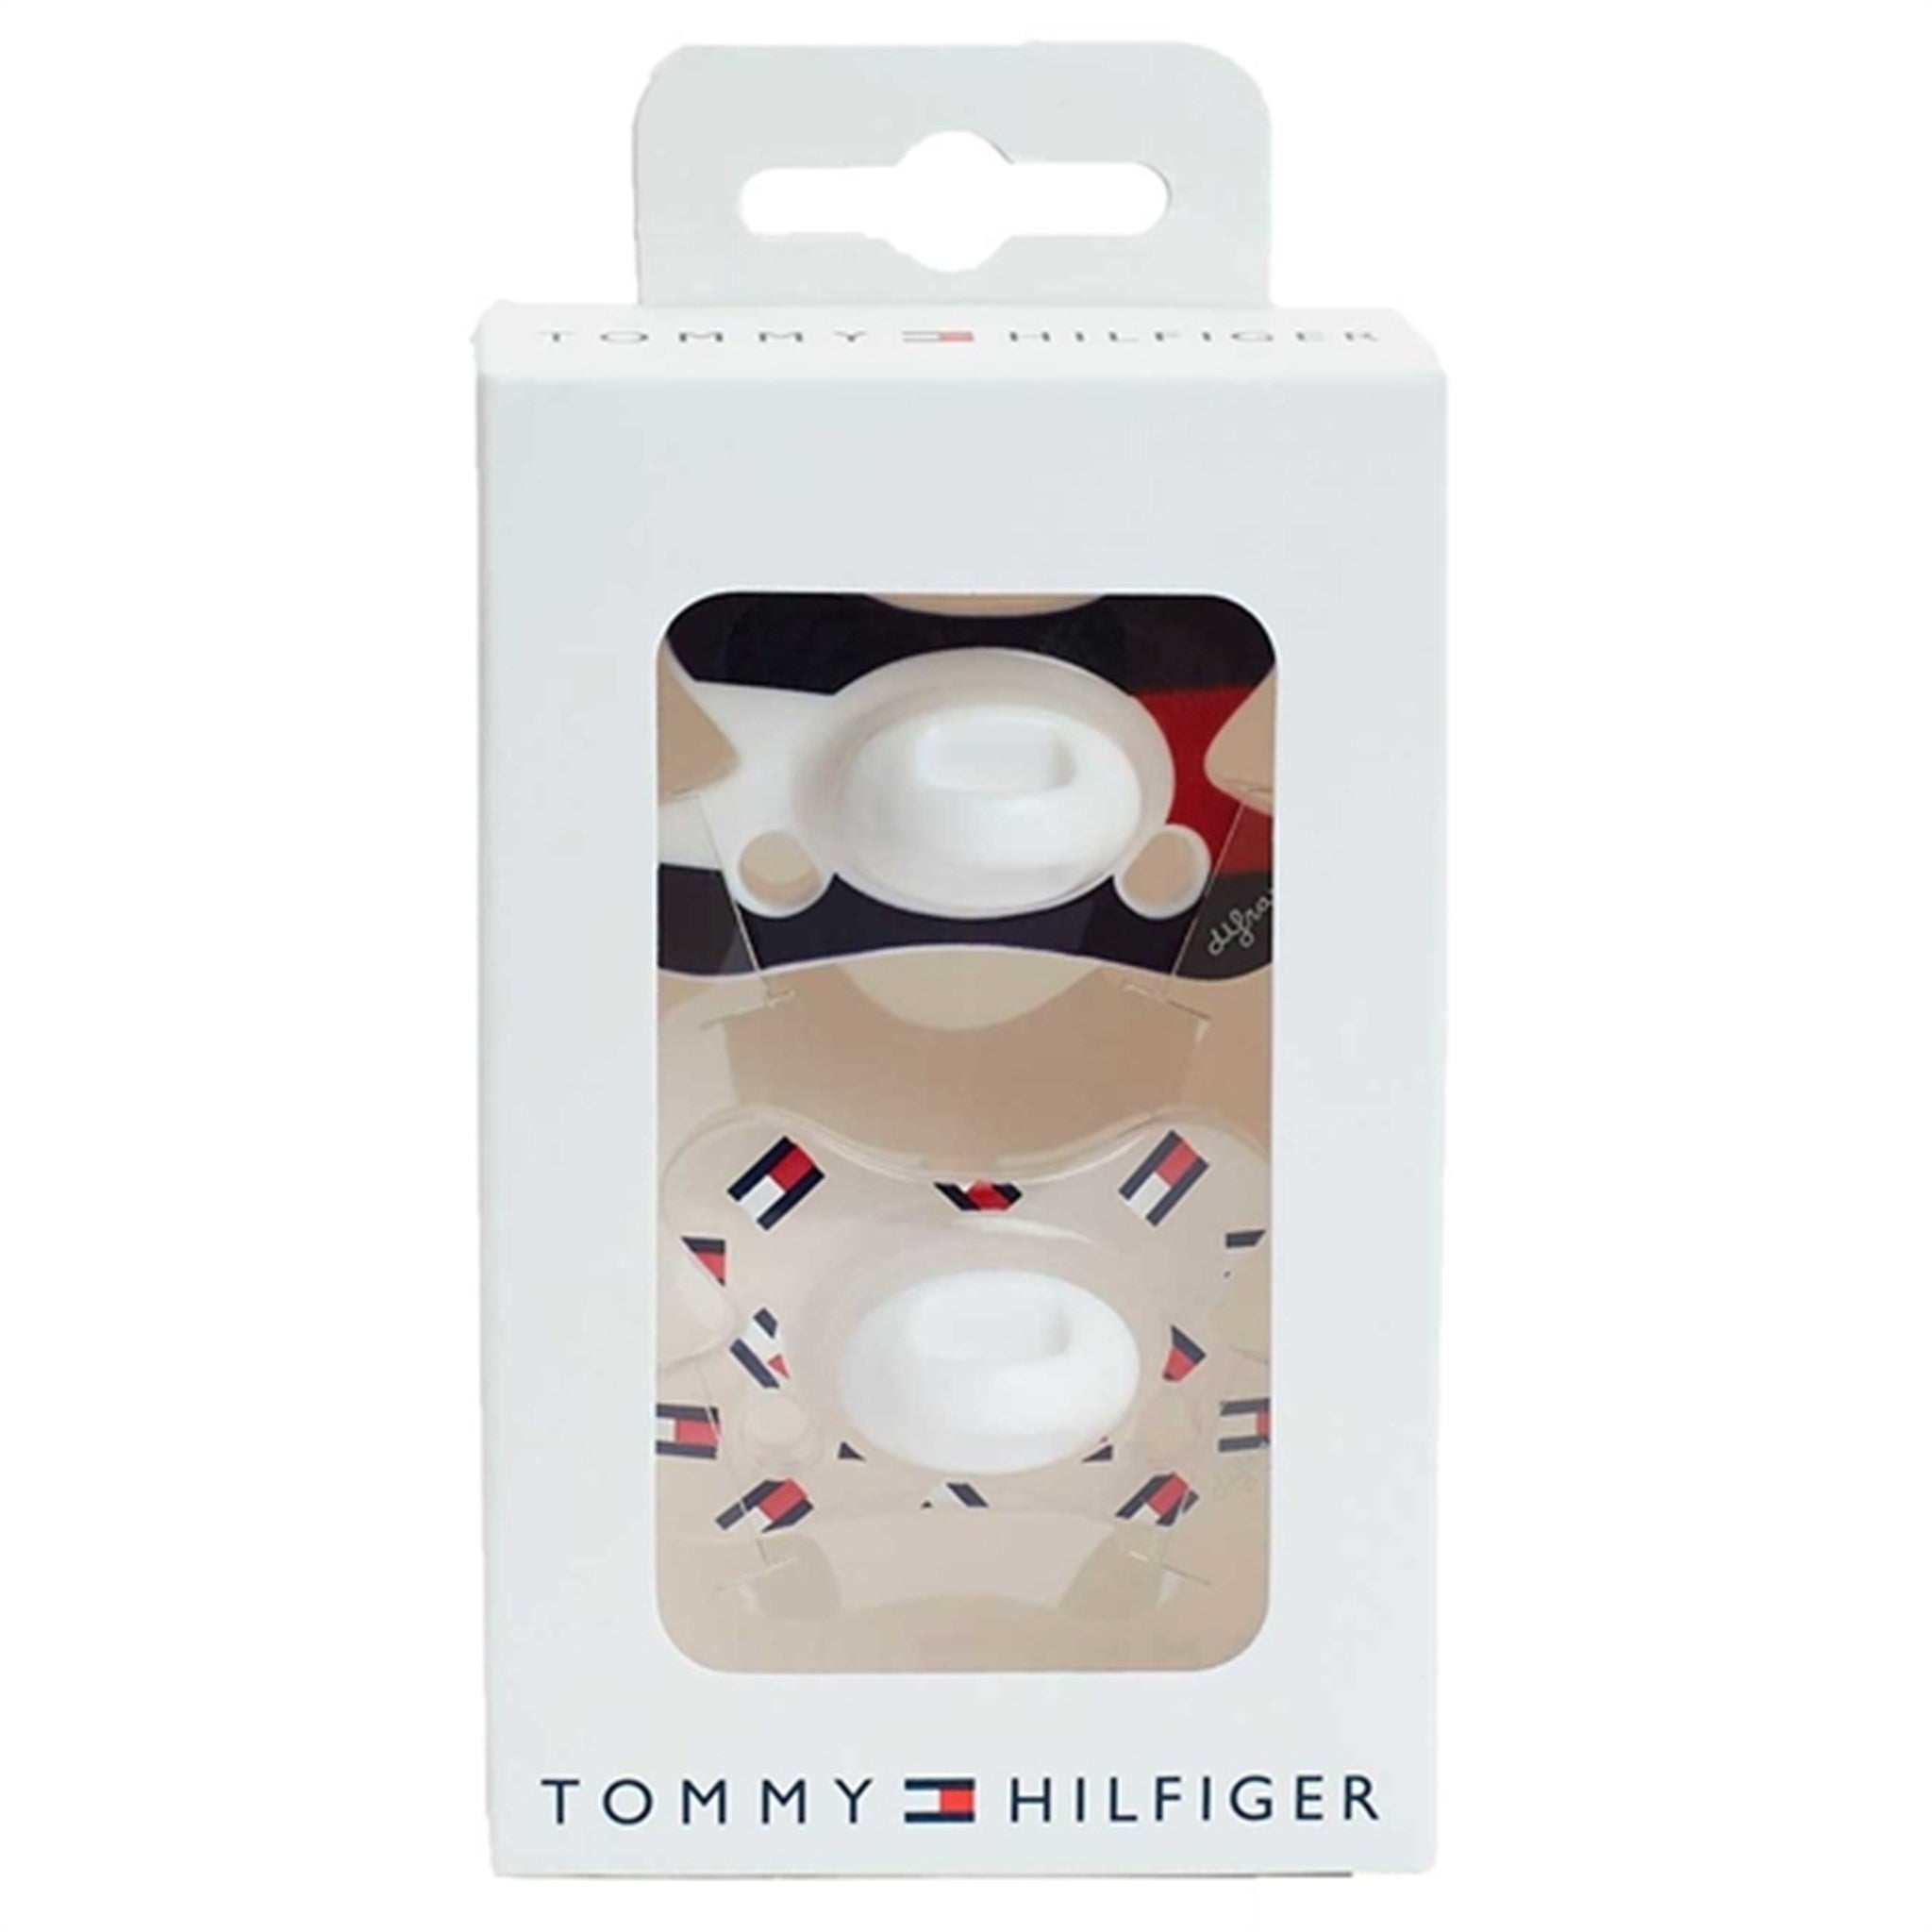 Tommy Hilfiger Baby Unisex Dummies 2-pack Pacifier White 3